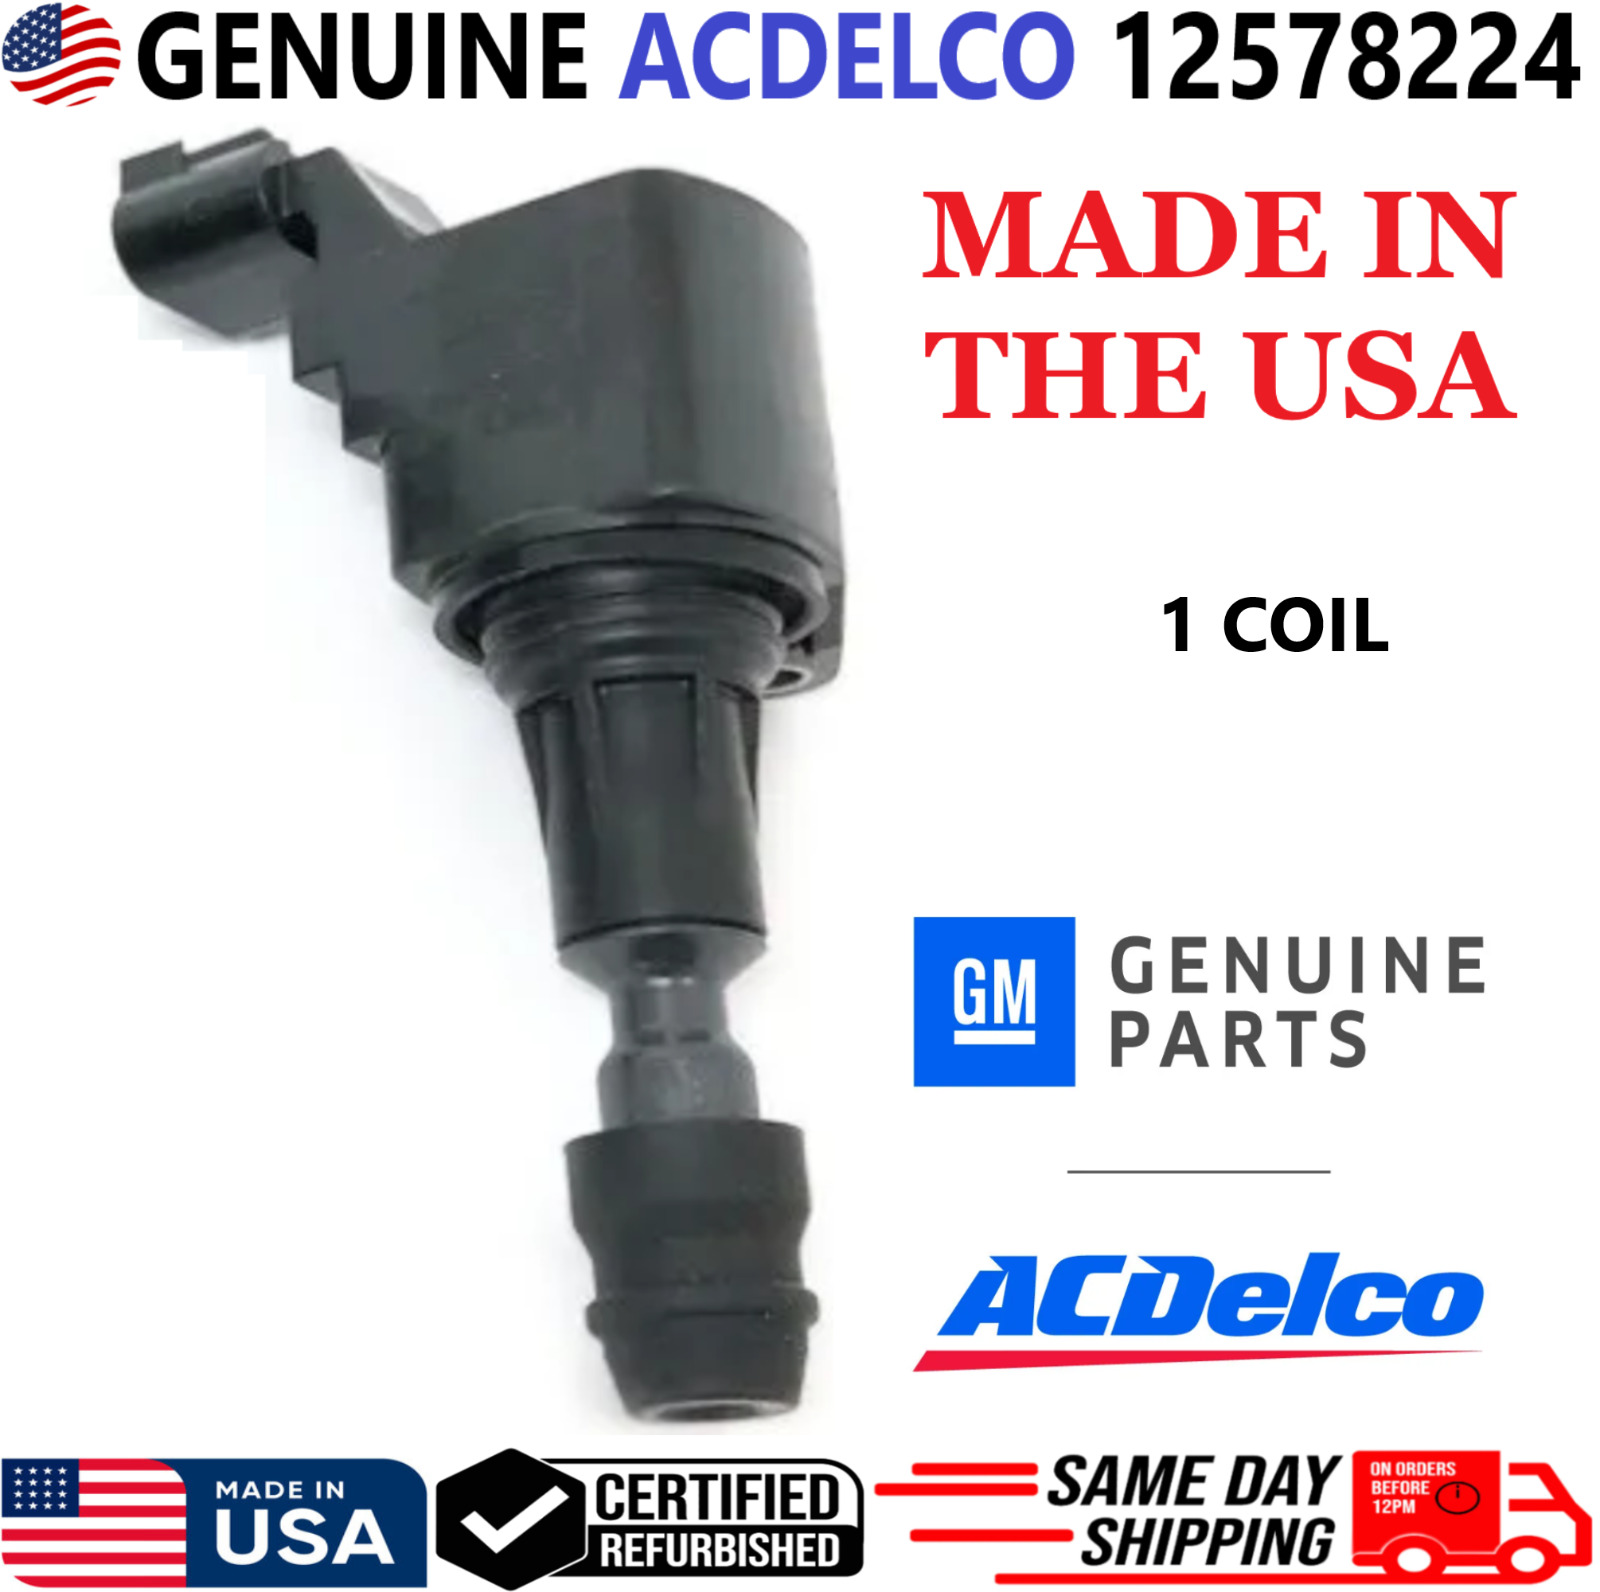 OEM ACDELCO Ignition Coil For 2005-2017 Buick Chevrolet GMC Pontiac I4, 12578224